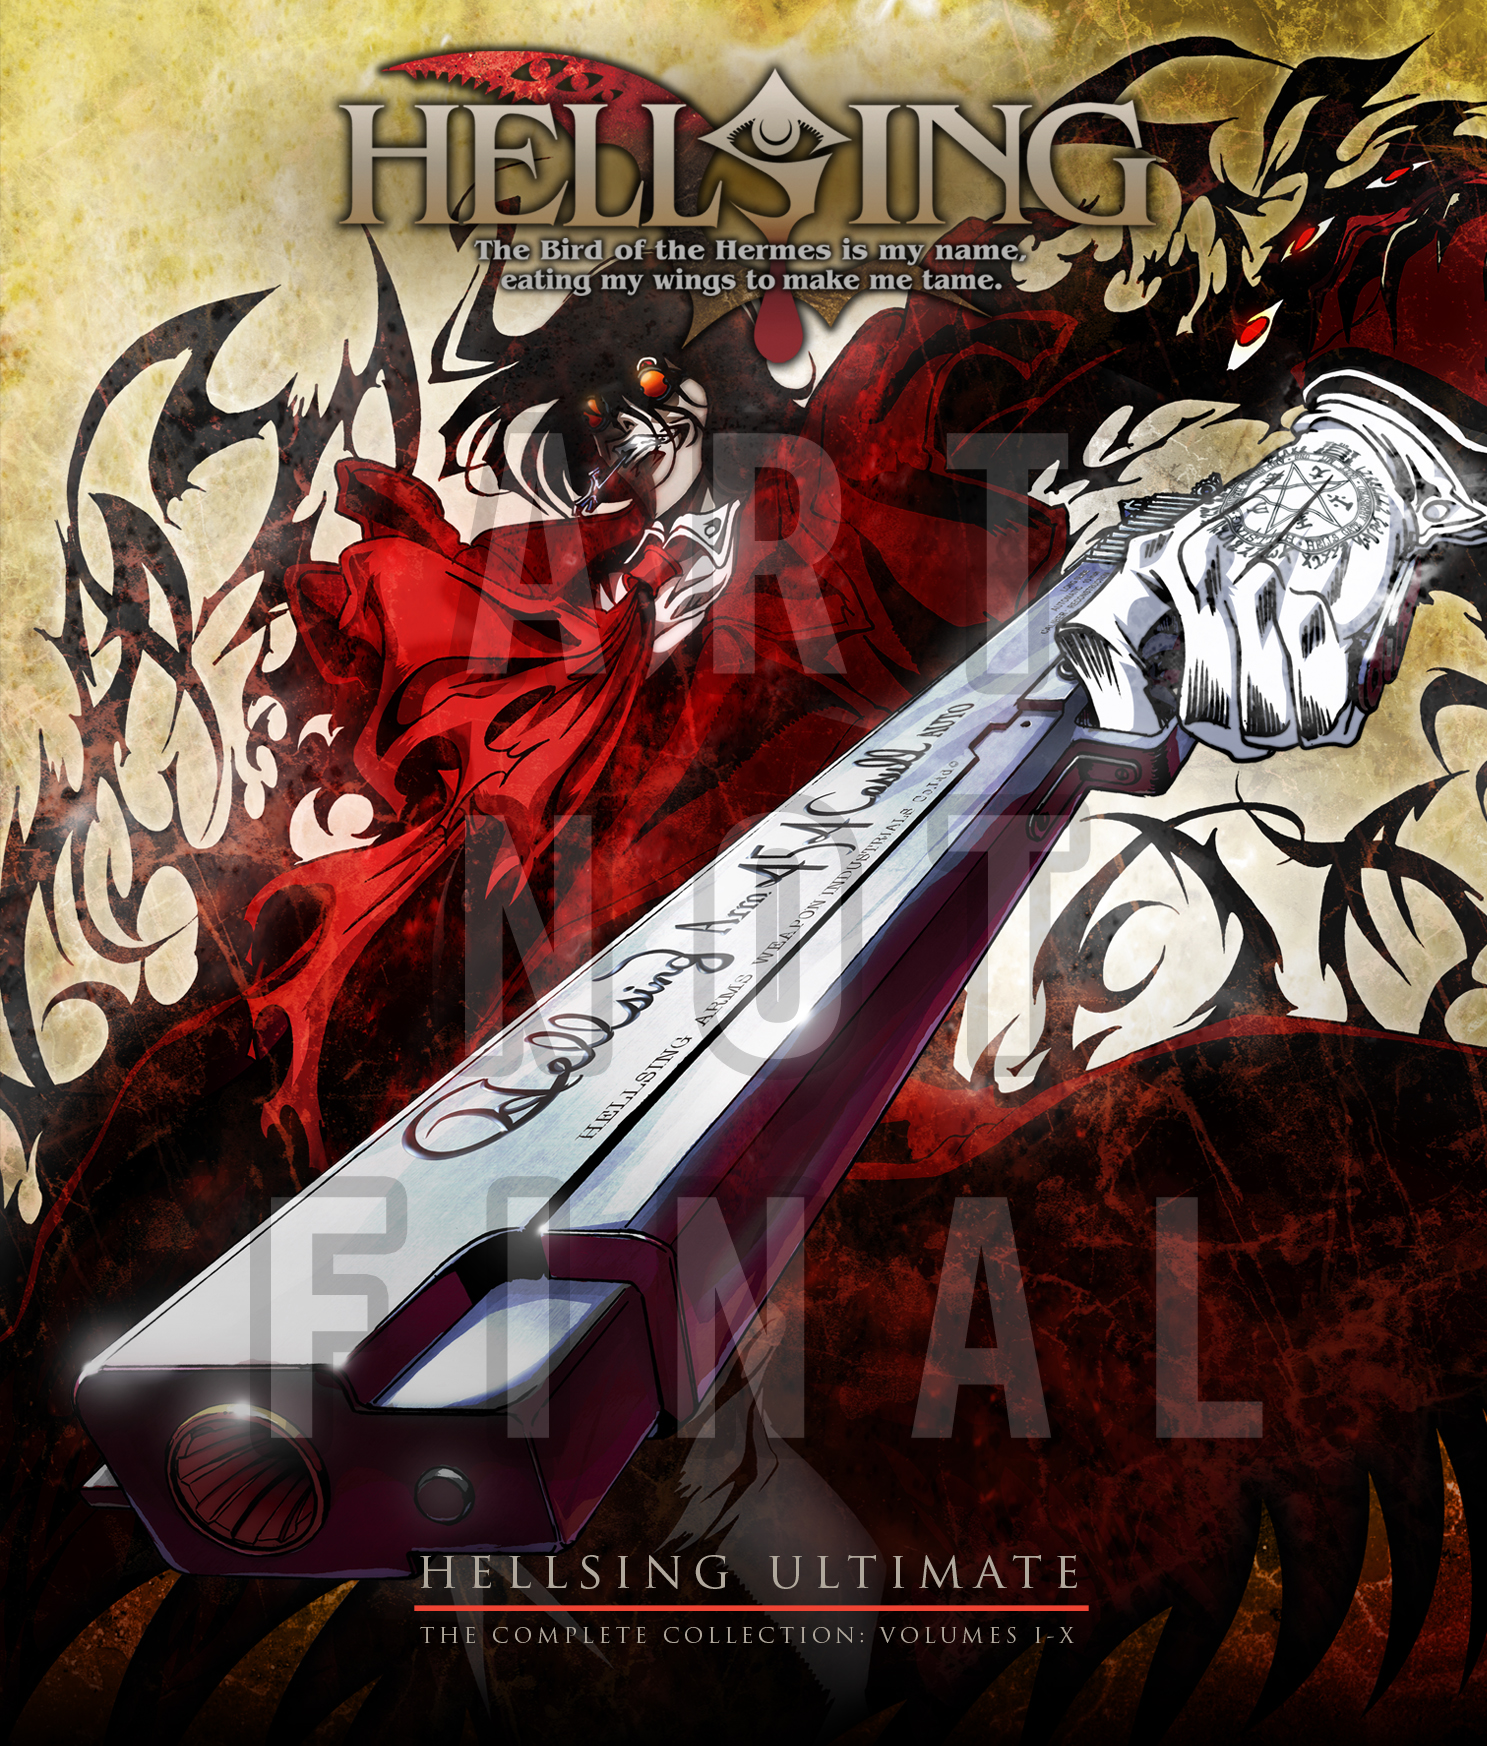 Hellsing Ultimate: The Complete Collection Volumes I-X [Blu-ray] - Best Buy